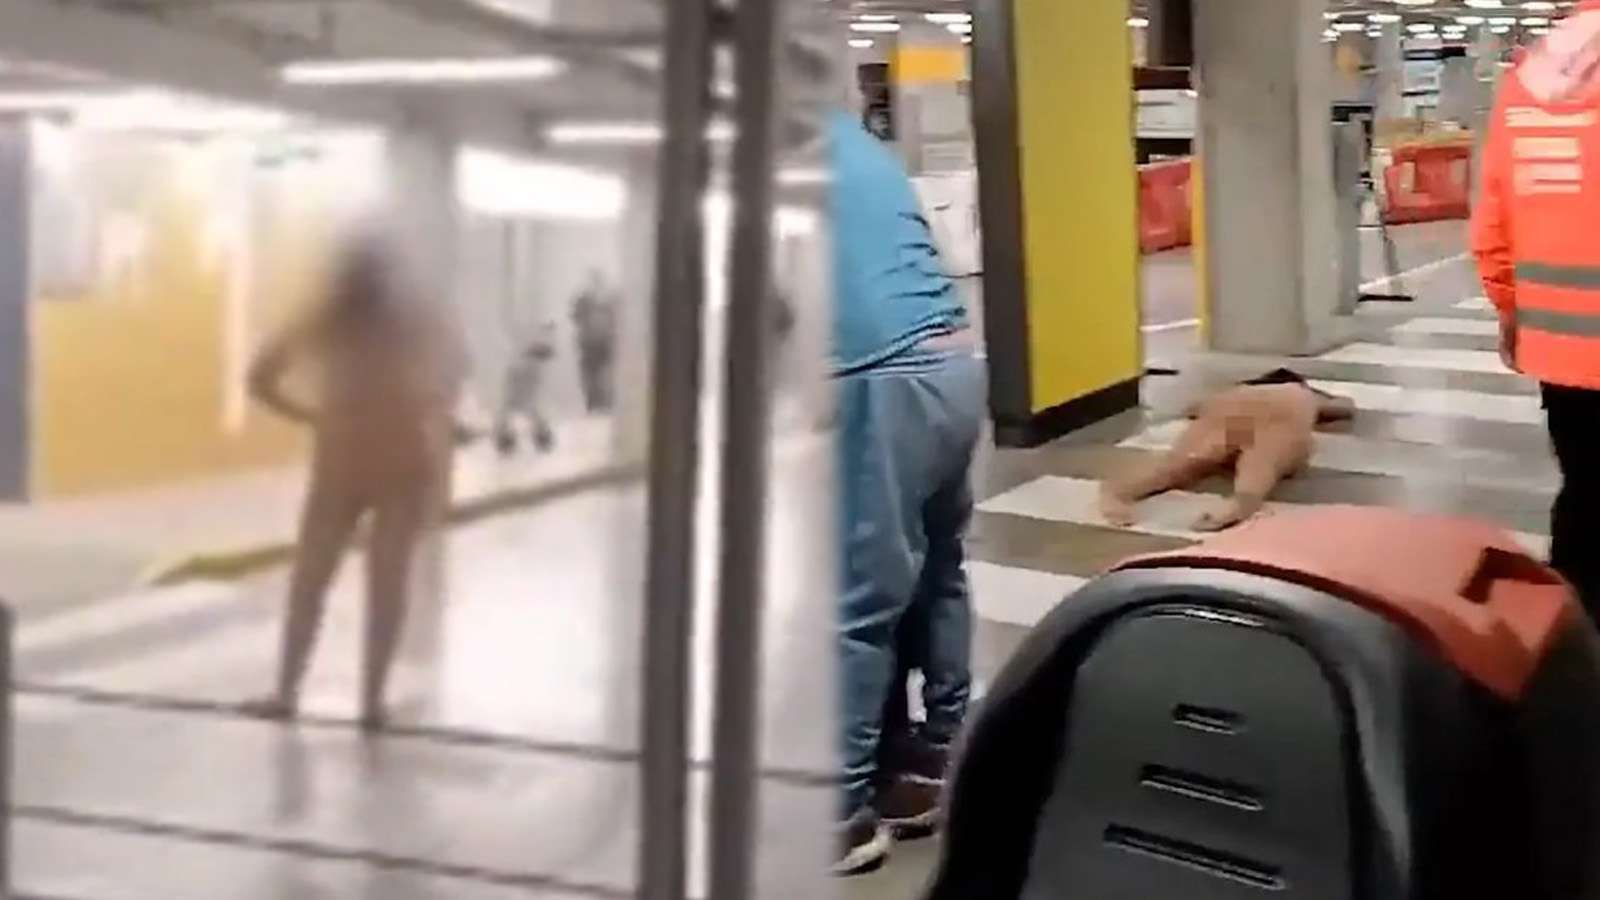 Naked 'female Terminator' attacks people at airport after taking mushrooms